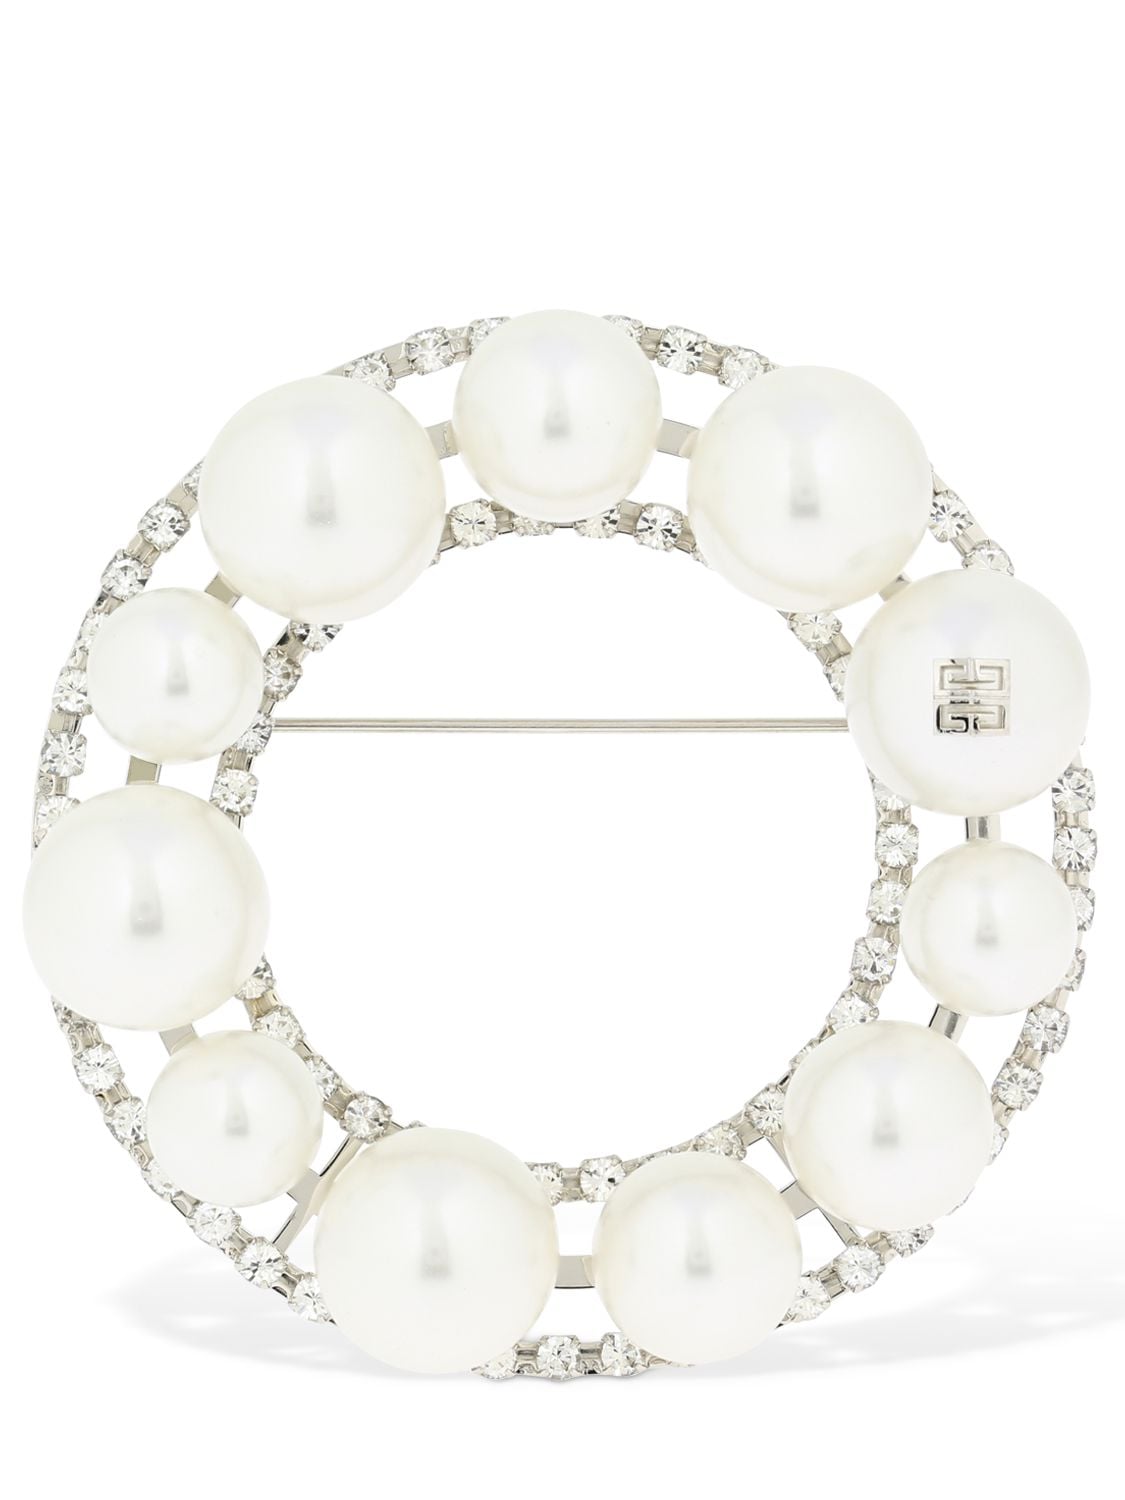 Givenchy Ariana Brooch W/ Imitation Pearls In White,silver